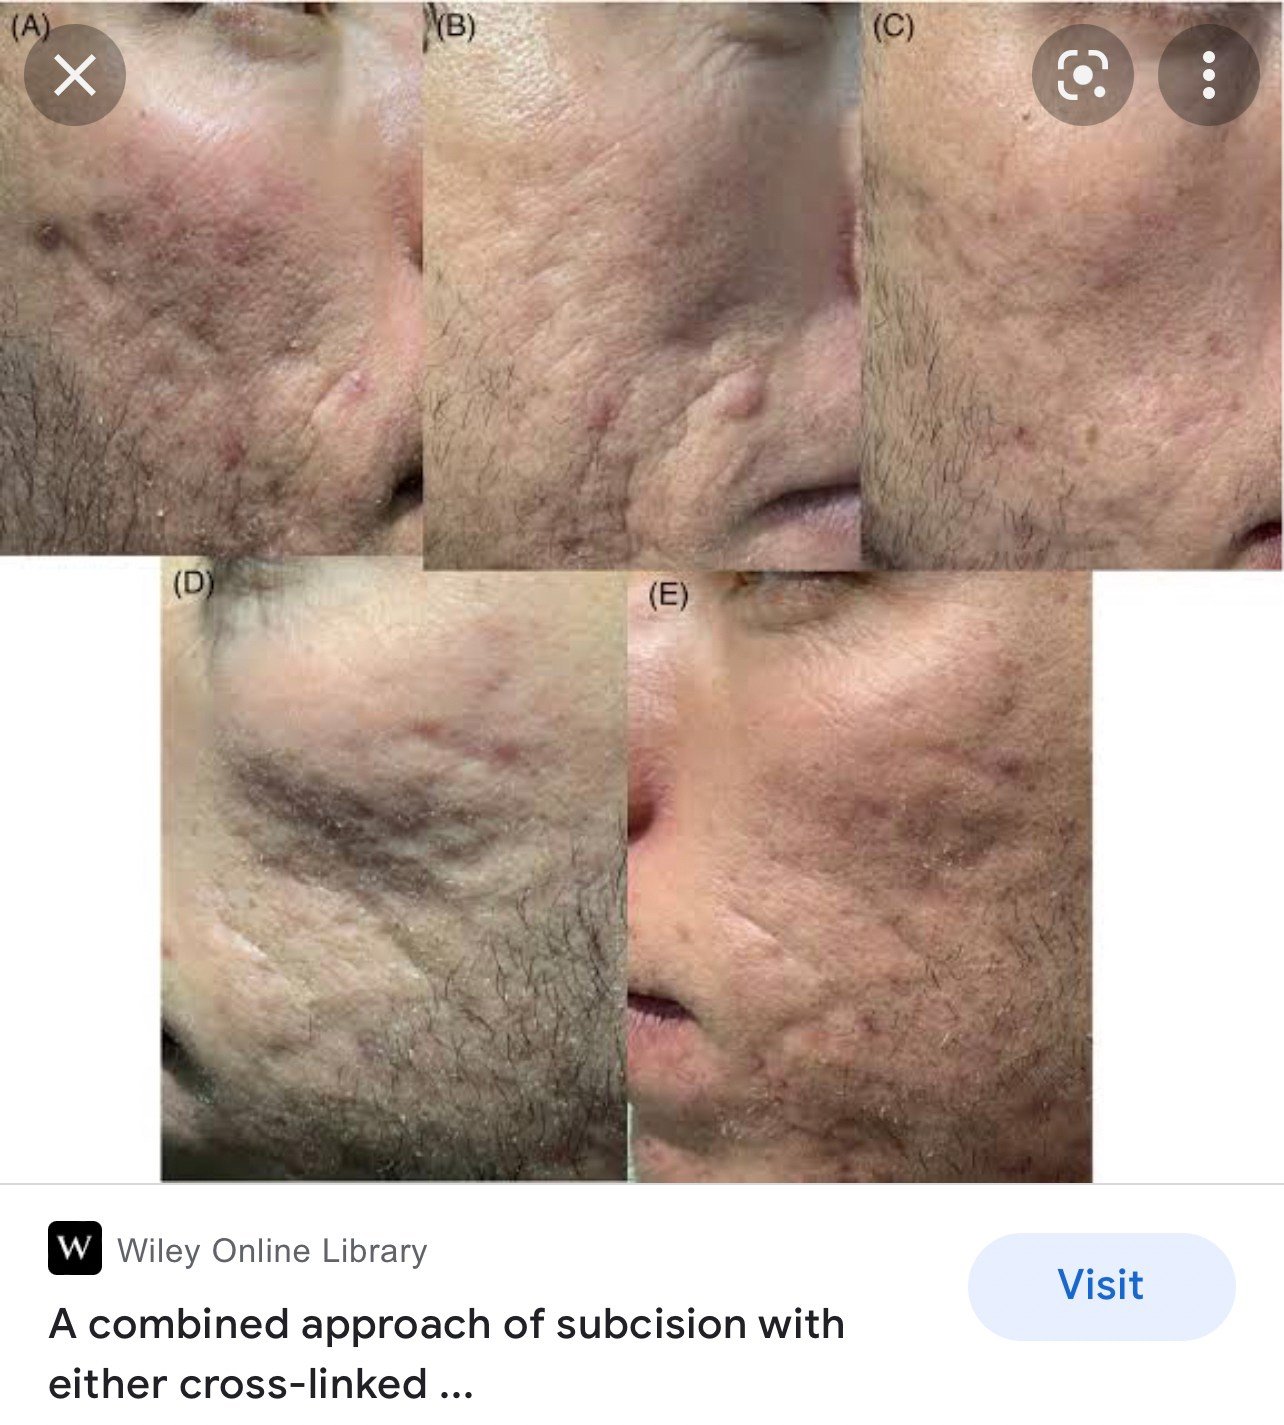 Update เทคนิค Subcision ตัดพังผืดรักษาหลุมสิว Acne Scar Subcision Techniques